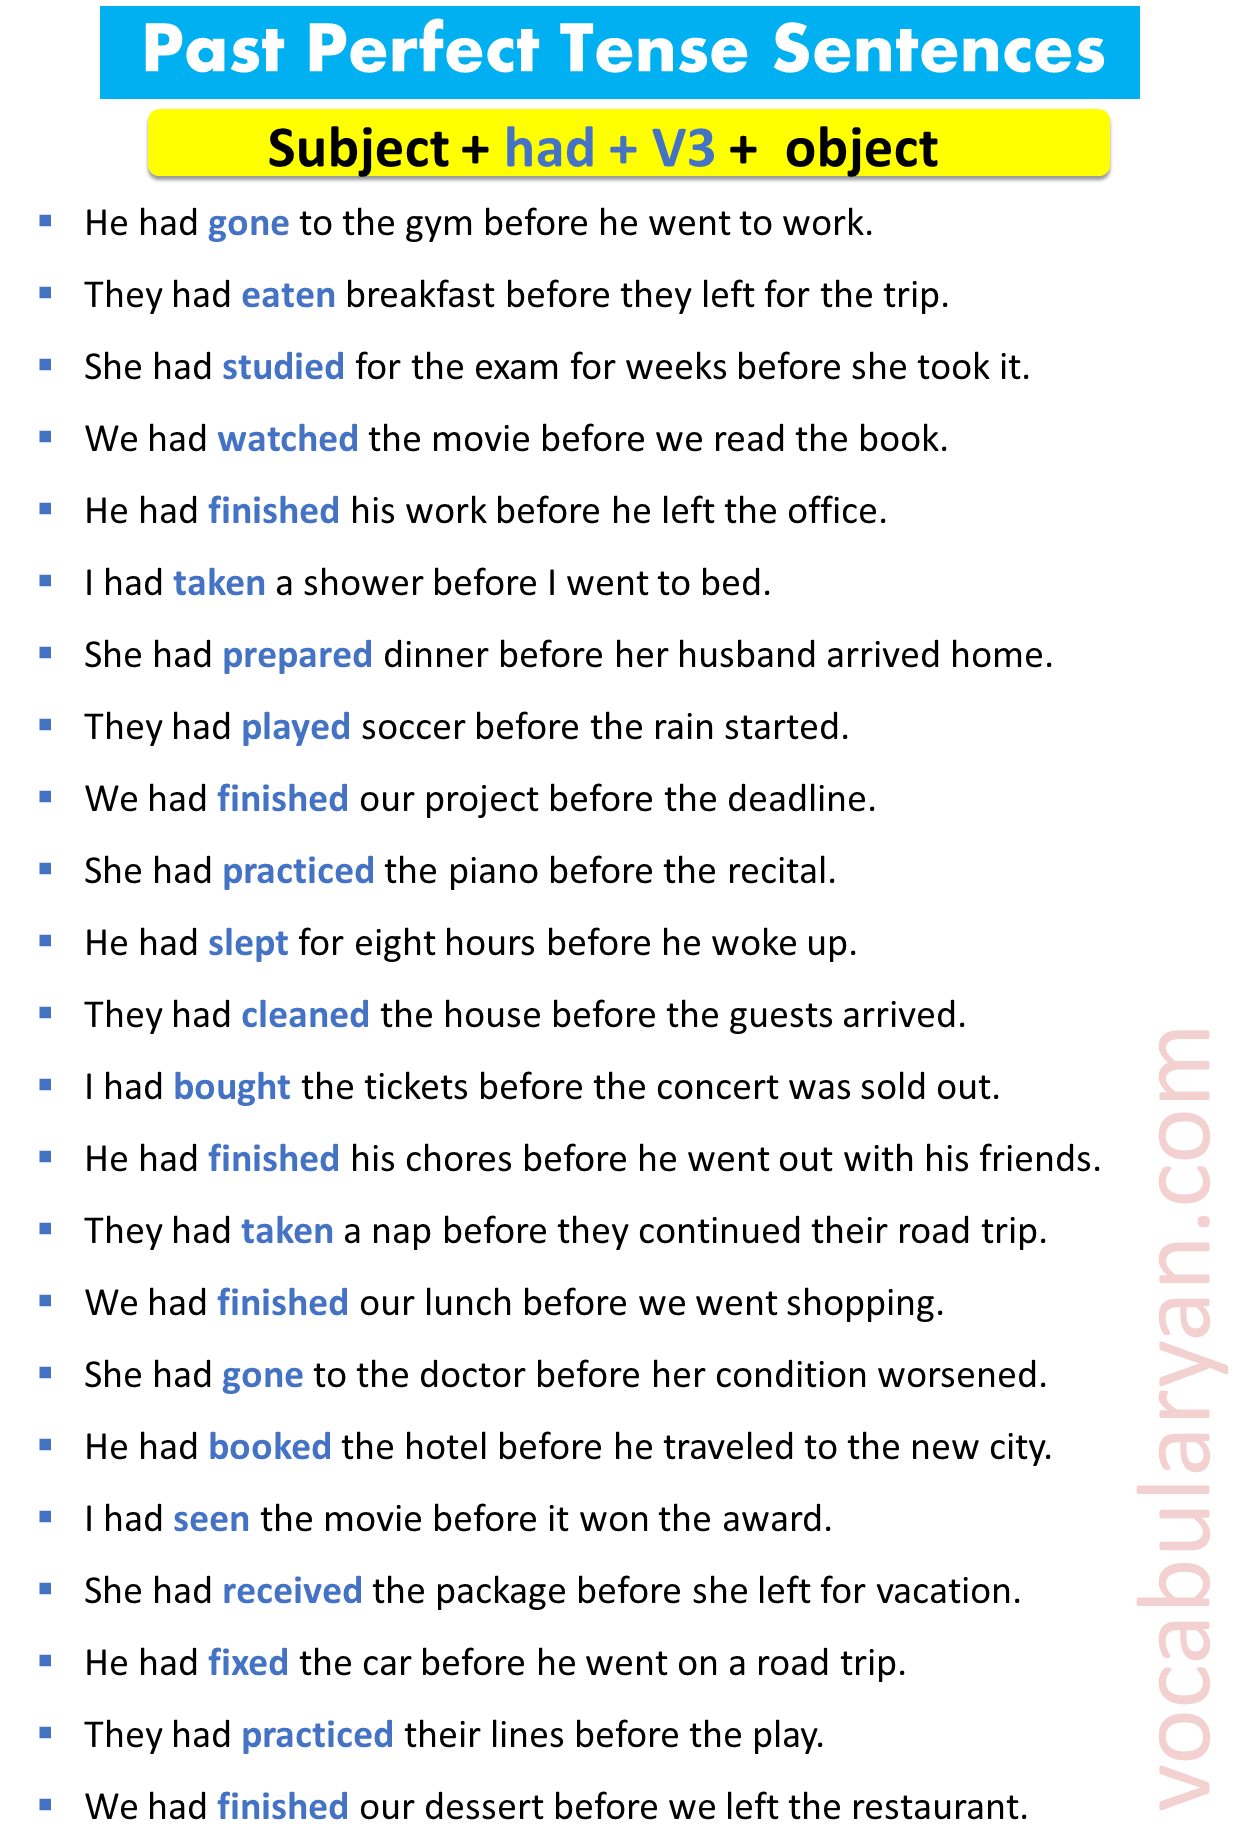 50+ Past Perfect Sentences Examples 